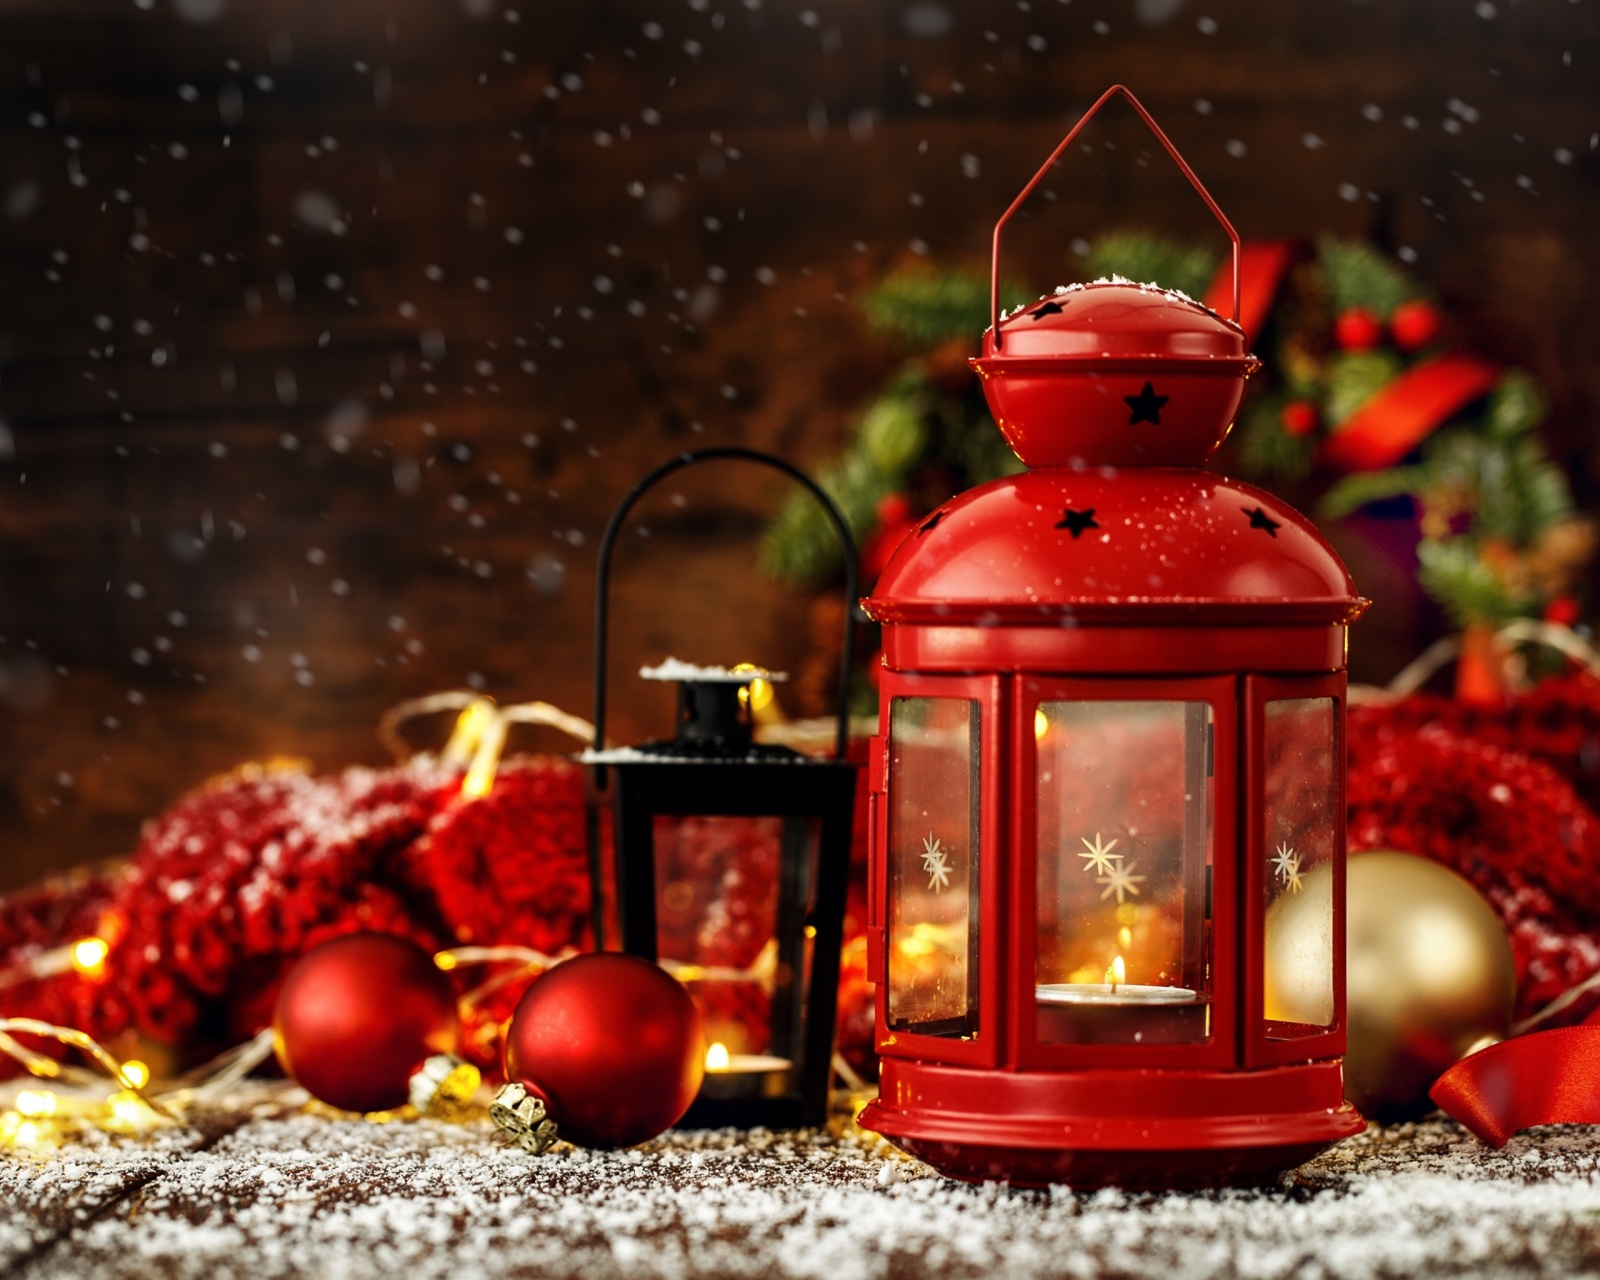 Christmas candles with holiday decor wallpaper 1600x1280